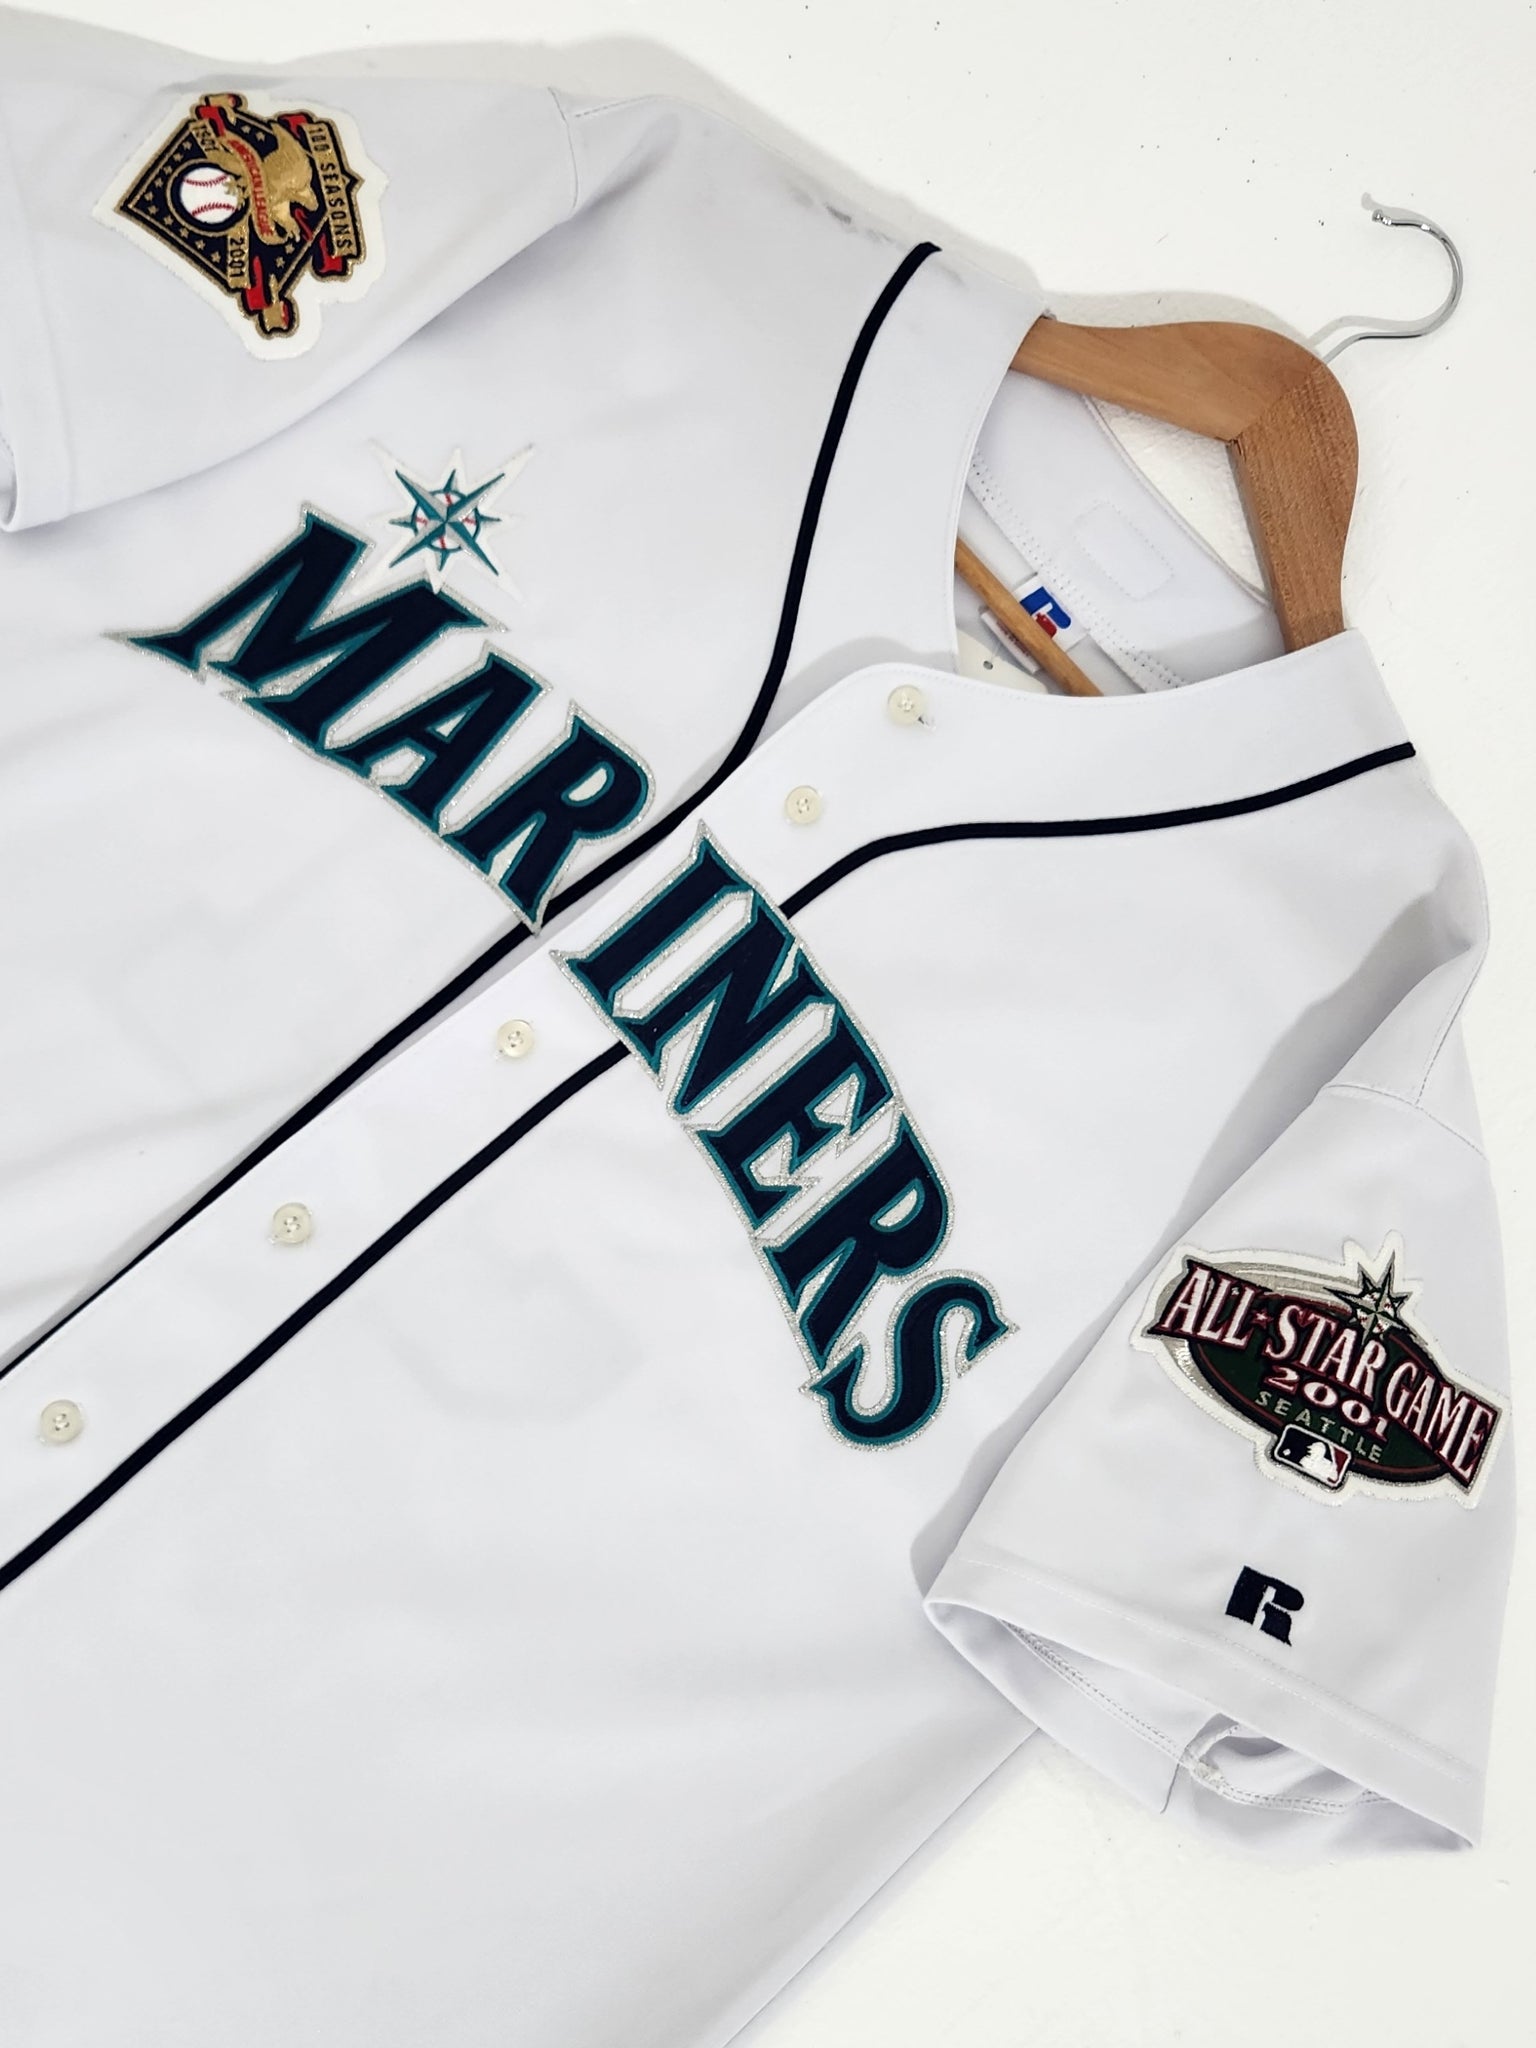 Seattle Mariners All Star Game Gear, Mariners All Star Game